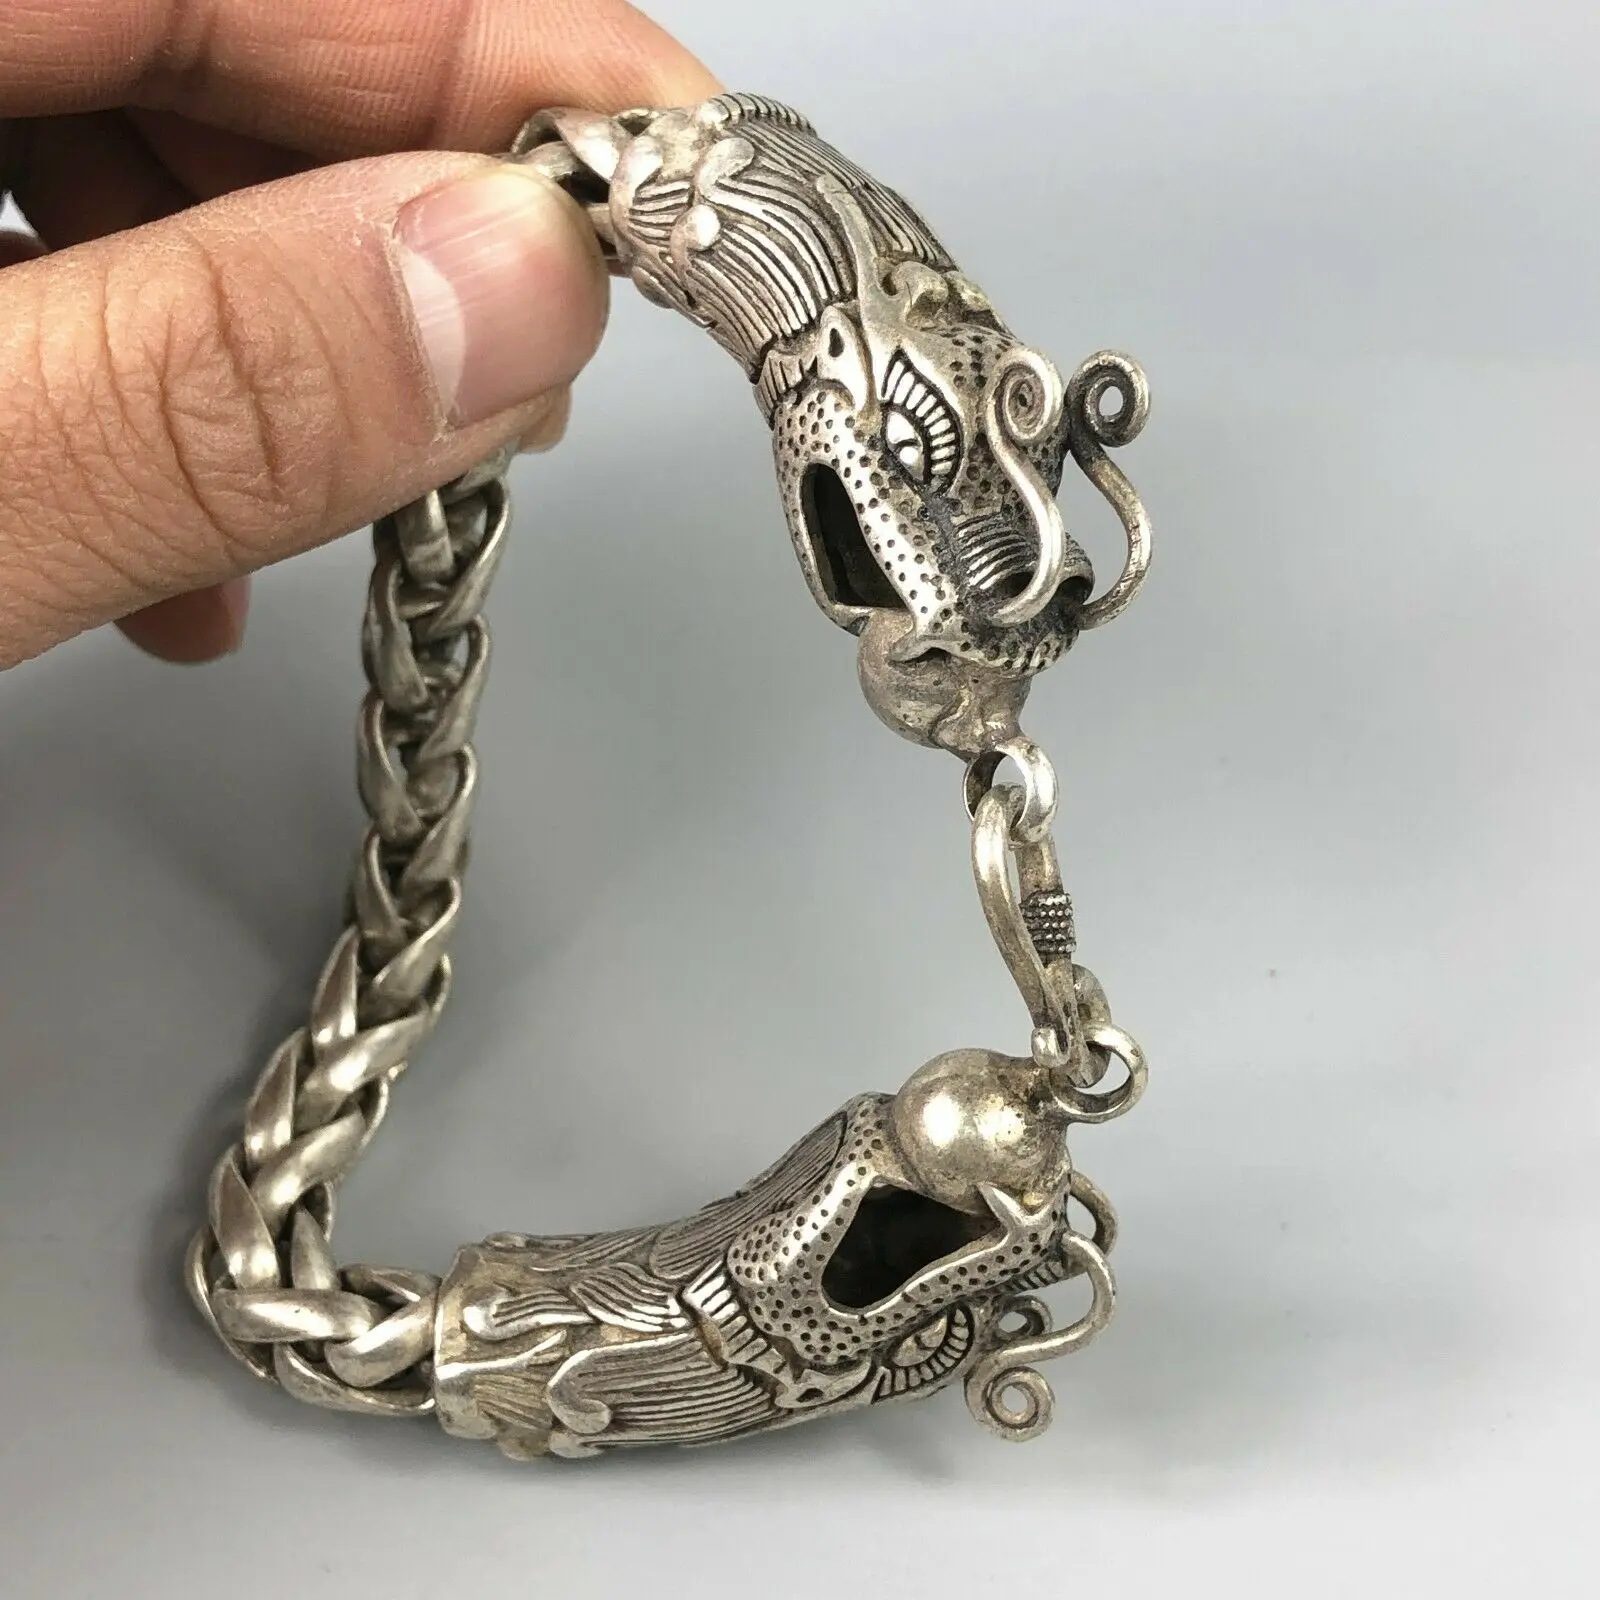 Exquisite Chinese Rare Collectible Tibet Silver Handwork Dragon Amulet Bracelet 